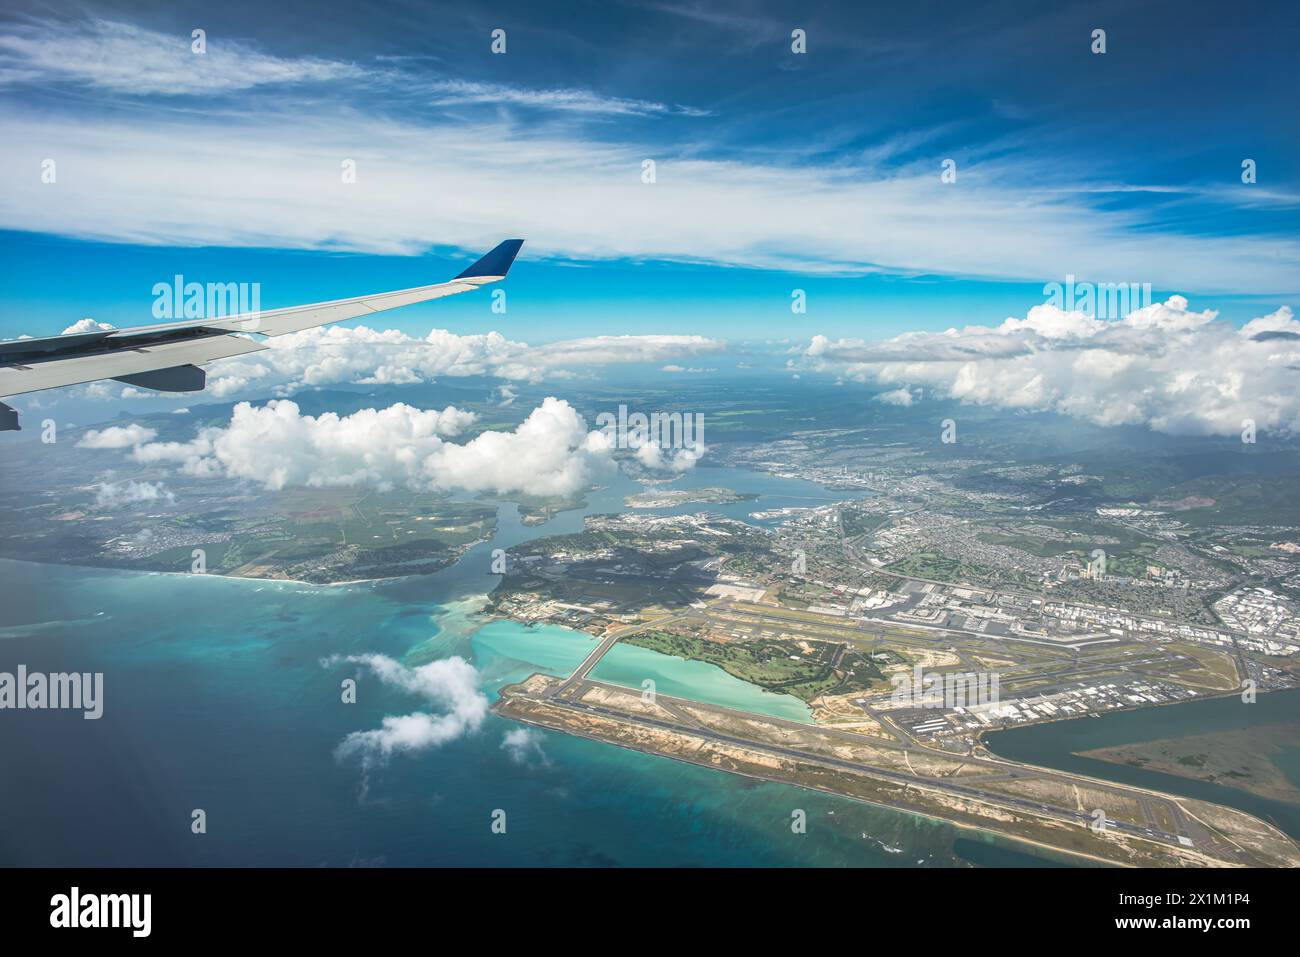 'Above the Horizons: An aerial vista captures Oahu, Hawaii, with the airport below, framed by billowing clouds, a vast expanse of blue sky, and the di Stock Photo